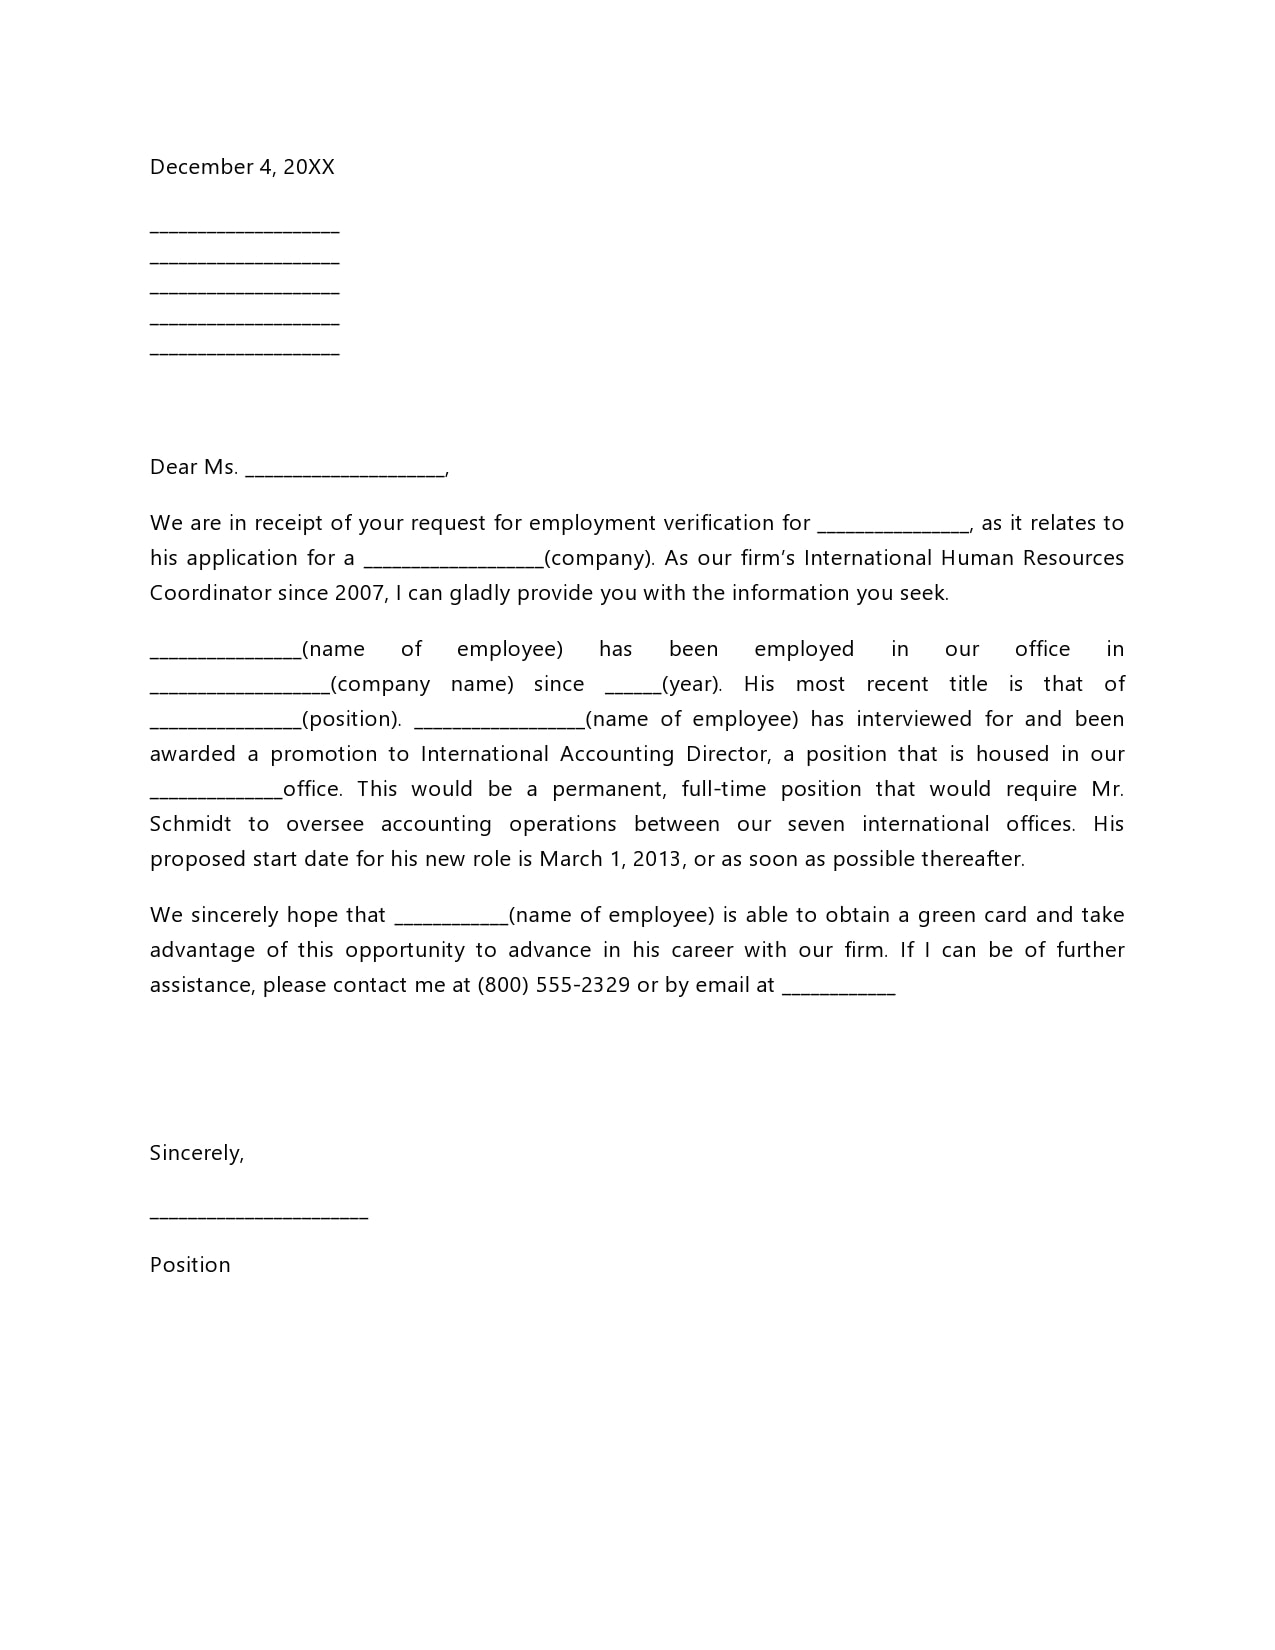 Standard Employment Verification Letter from templatearchive.com